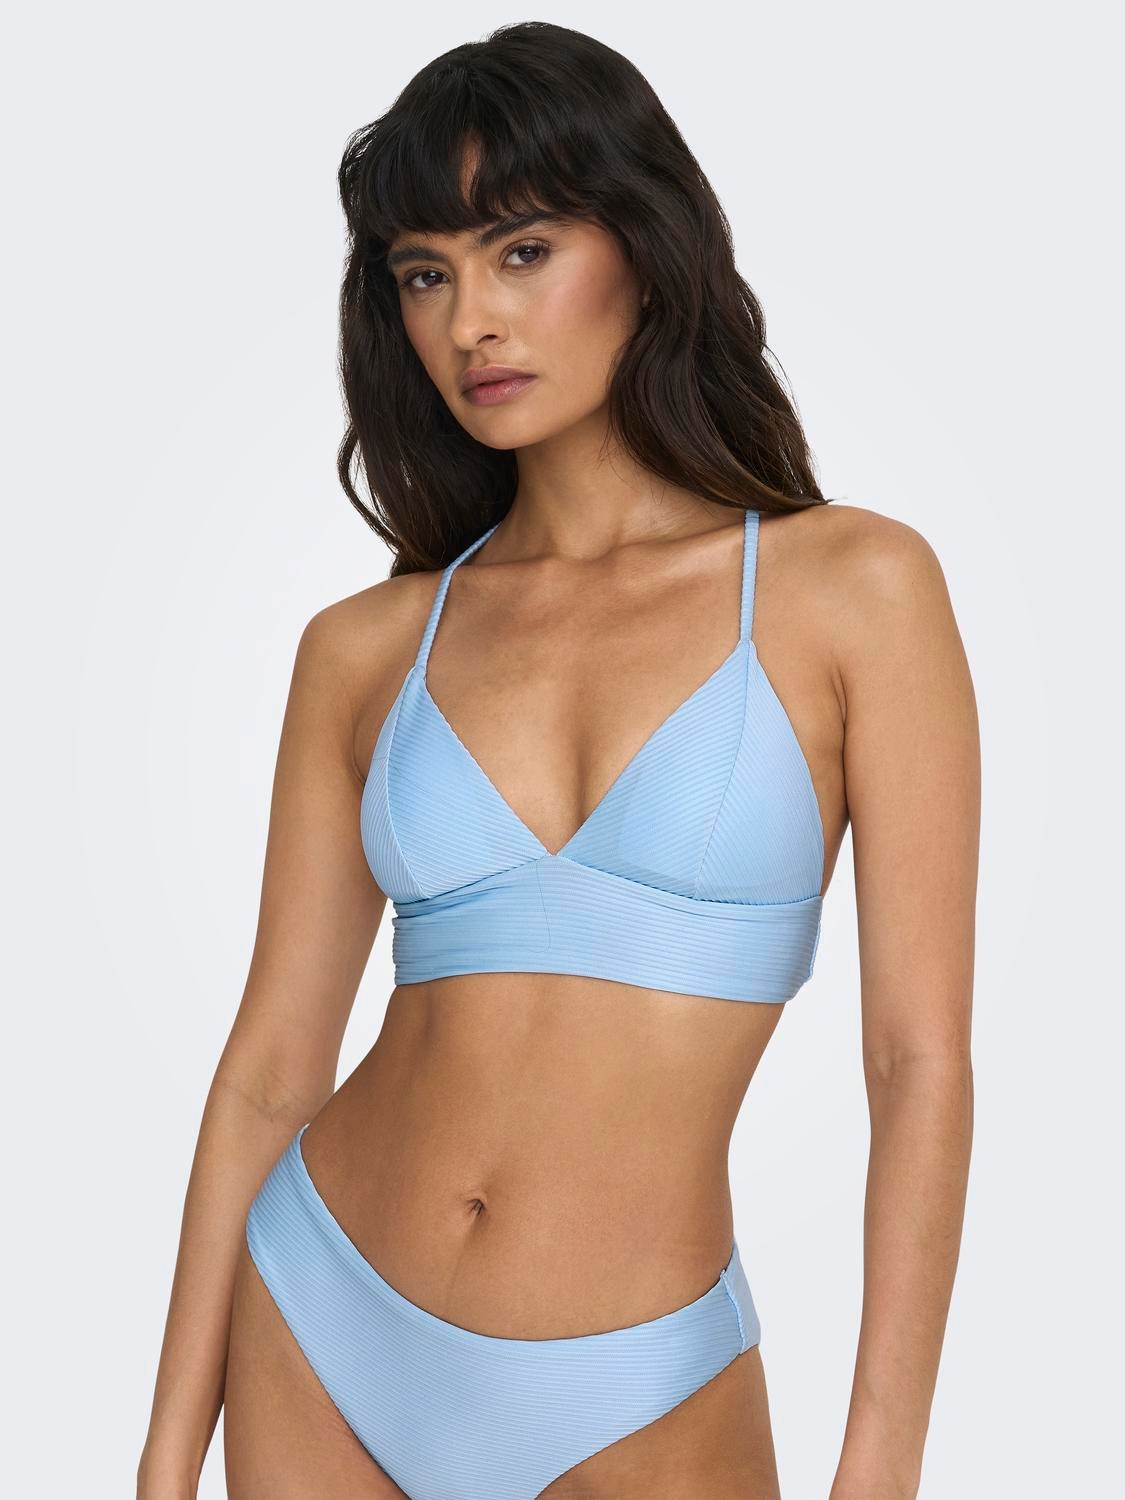 ONLY Solid Colored Bikini Set -Dutch Canal - 15304100